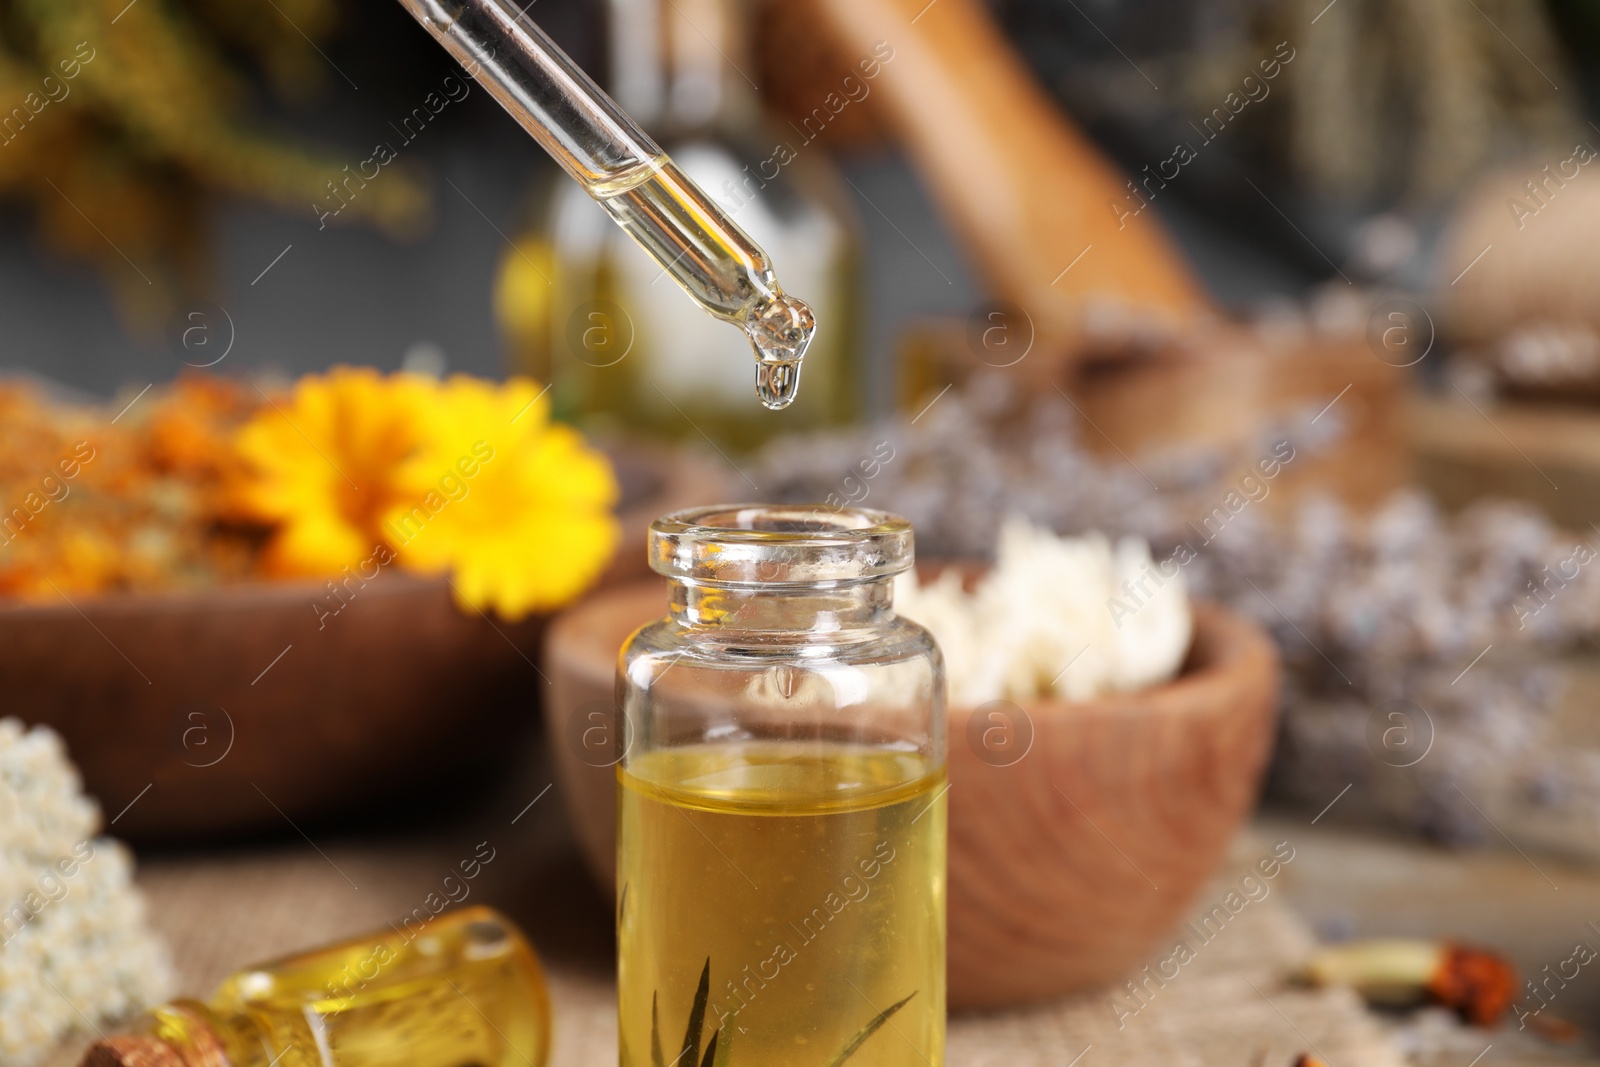 Photo of Dripping herbal essential oil from pipette into bottle on table, closeup